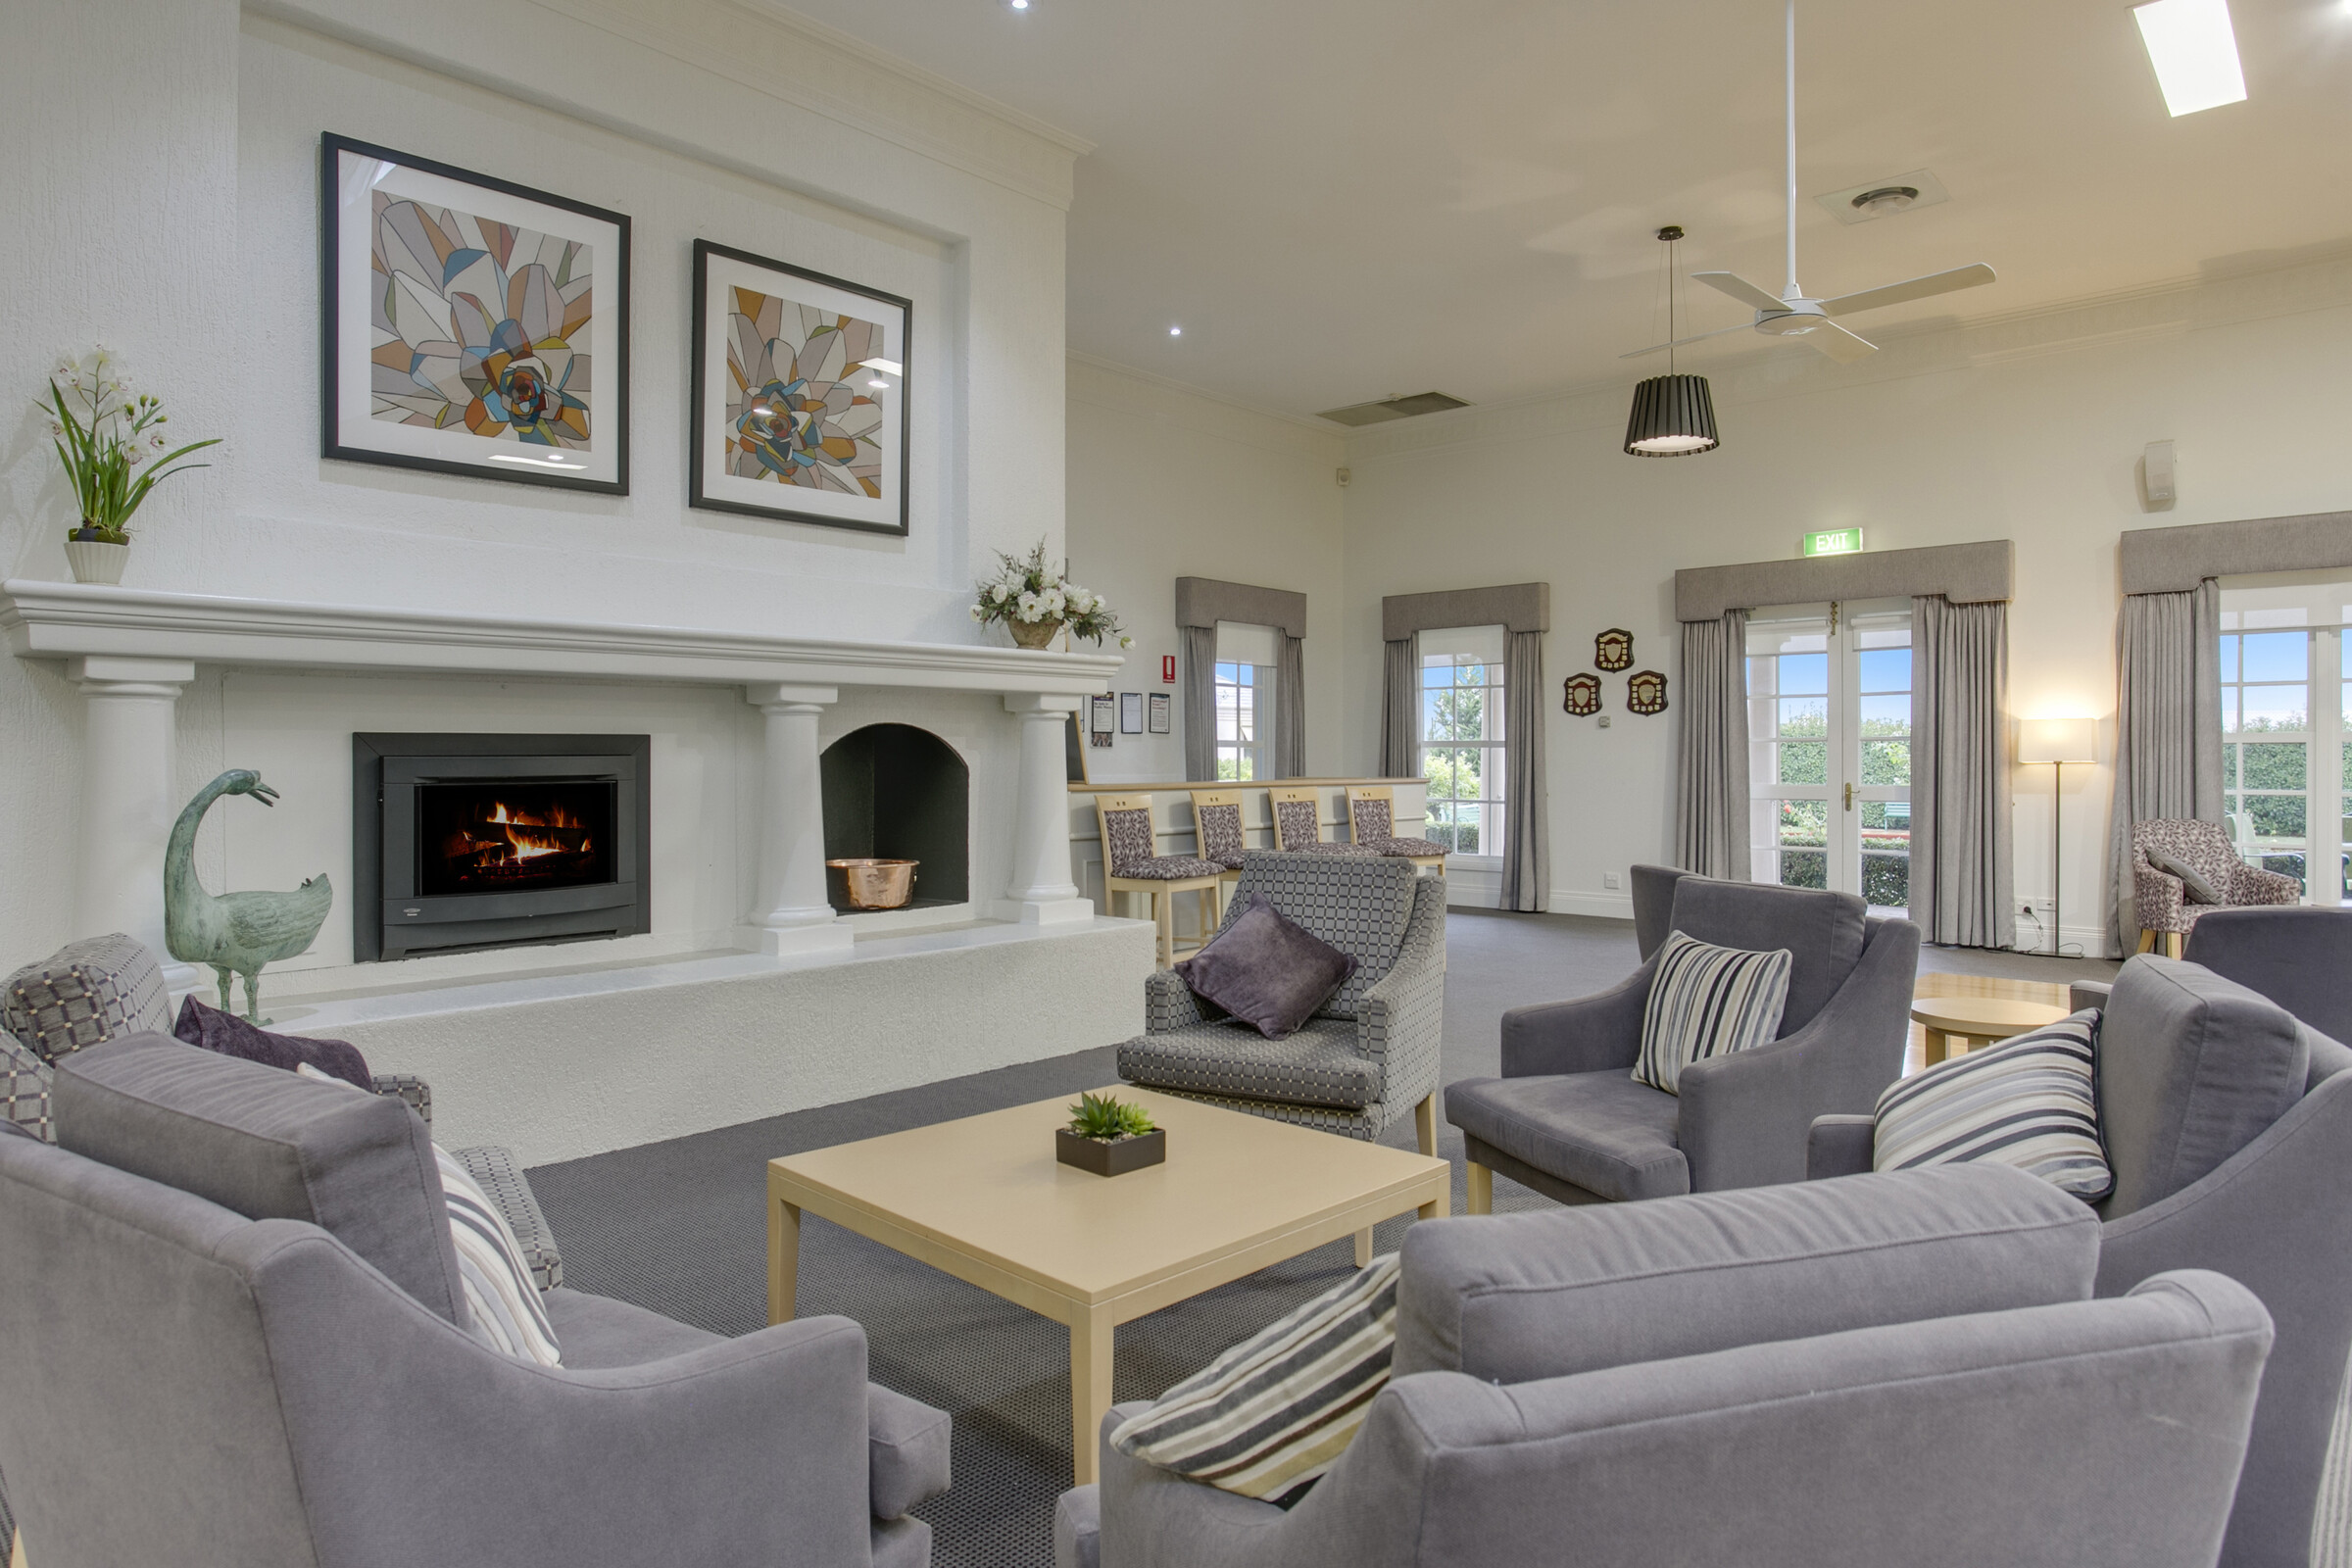 Port Phillip Village lounge area with seating and fireplace